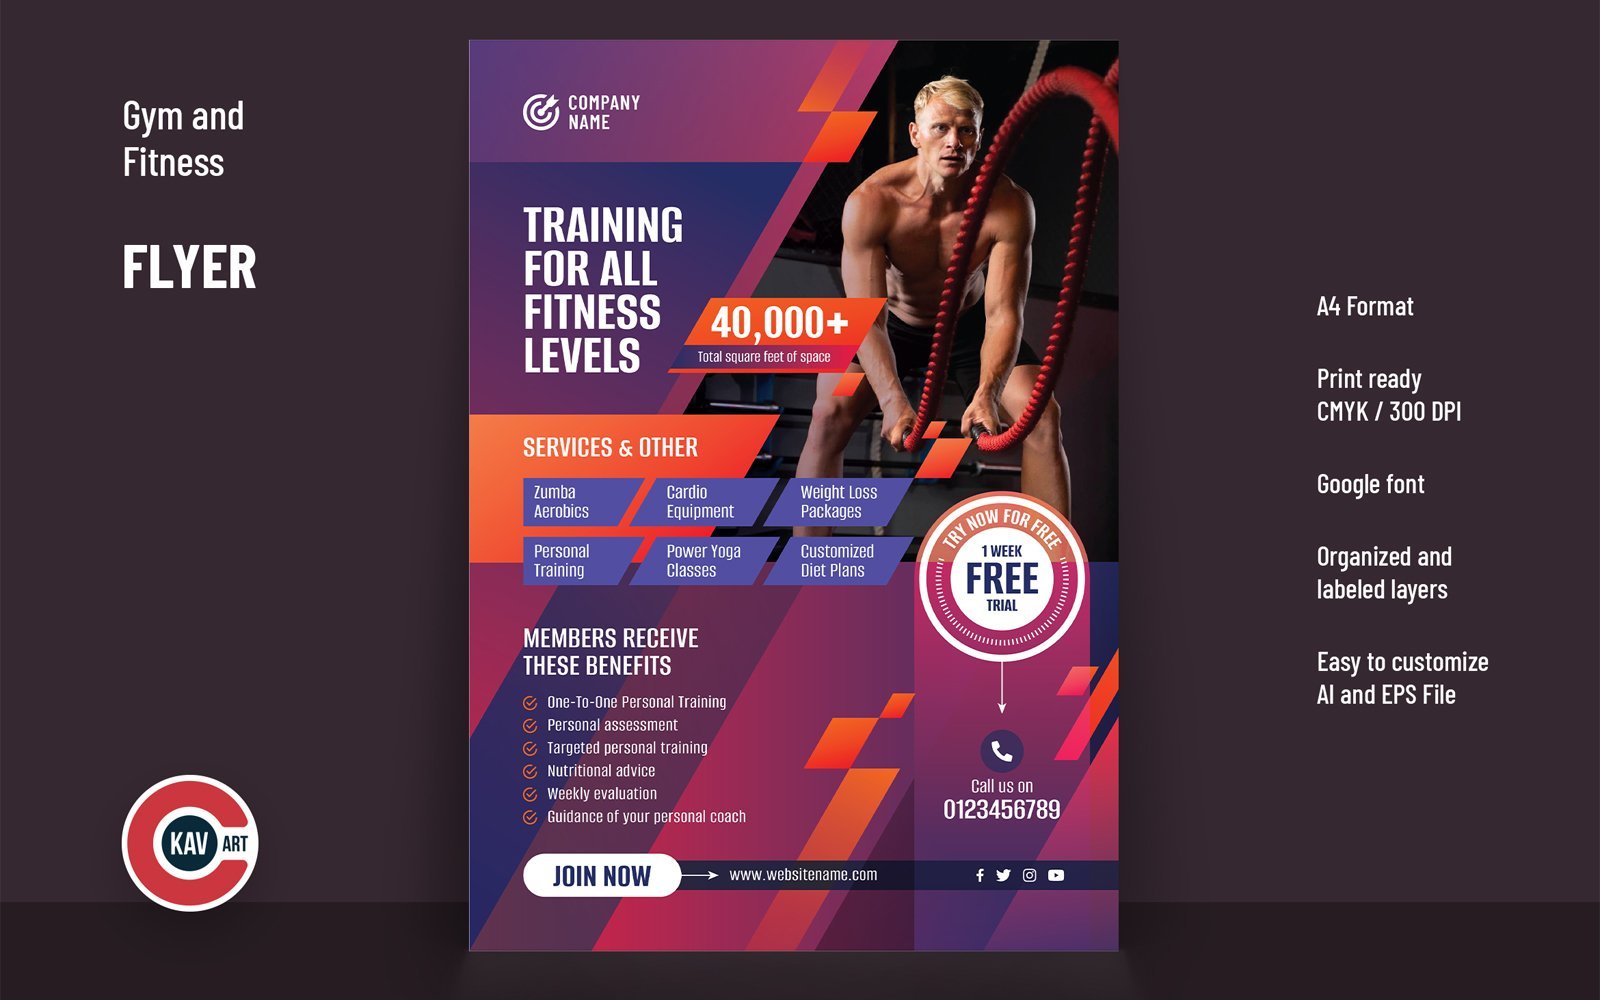 Gym and Fitness Product Flyer Template - 00233